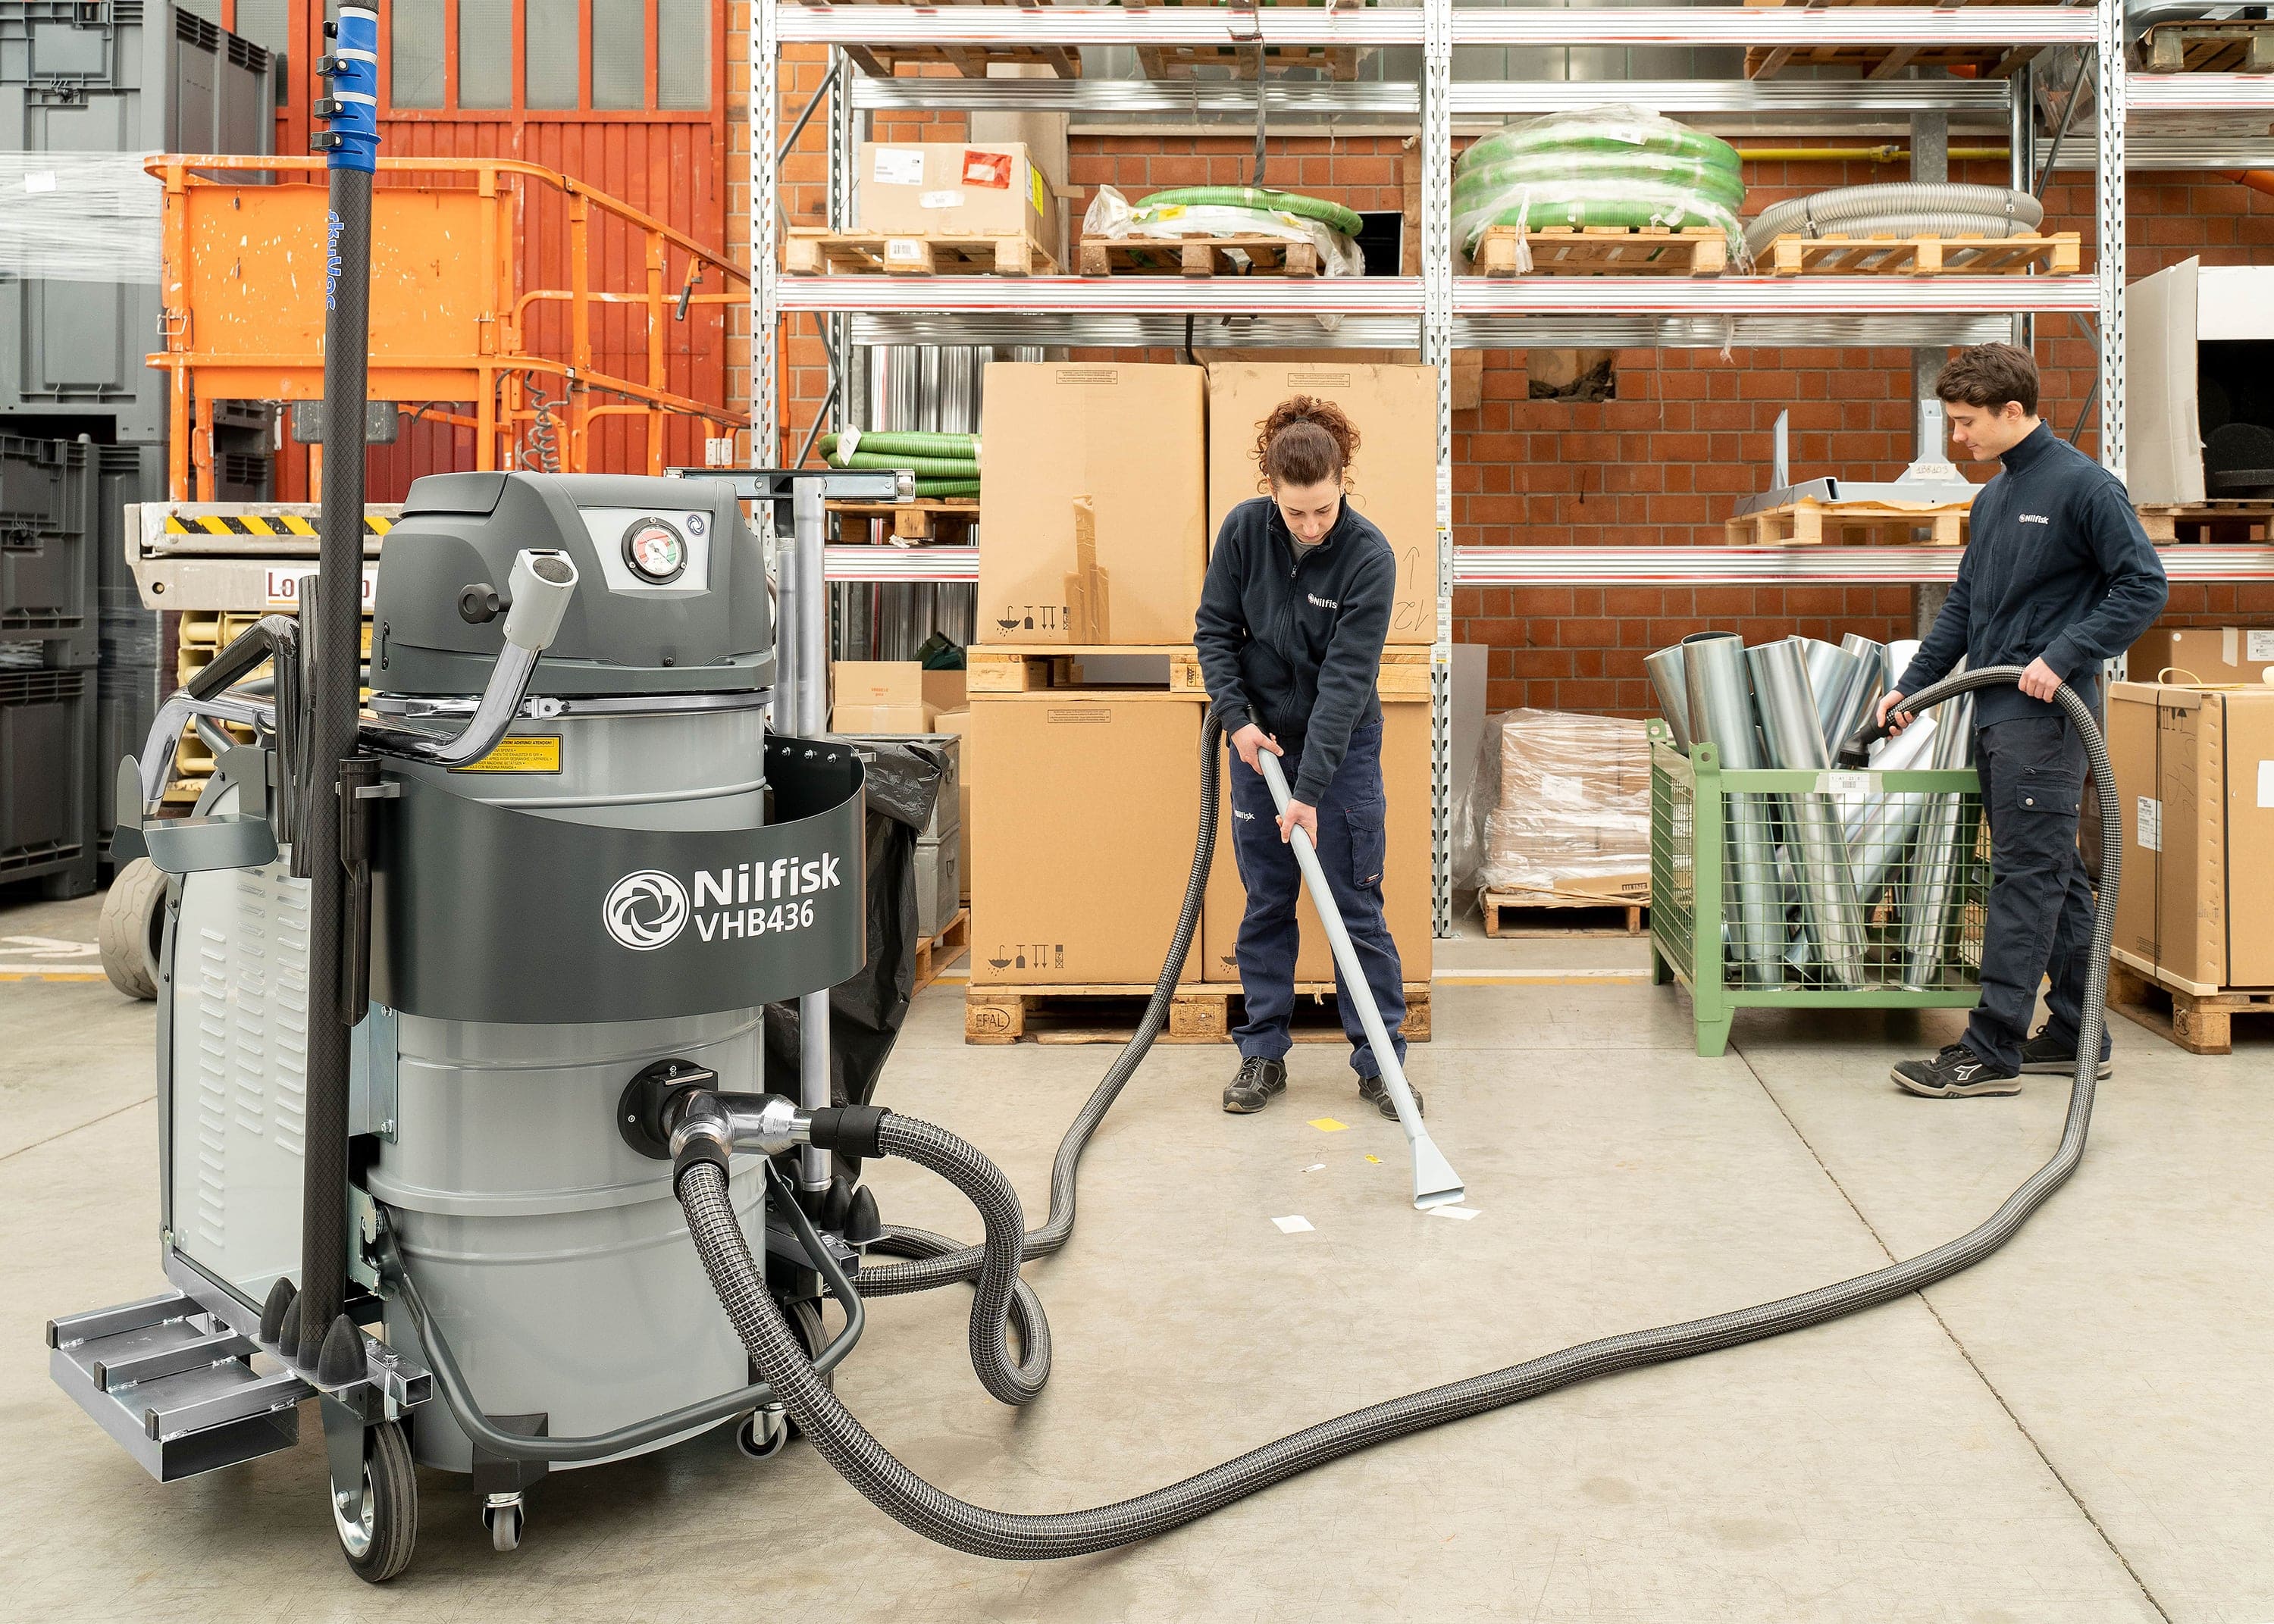 Battery-powered industrial vacuums